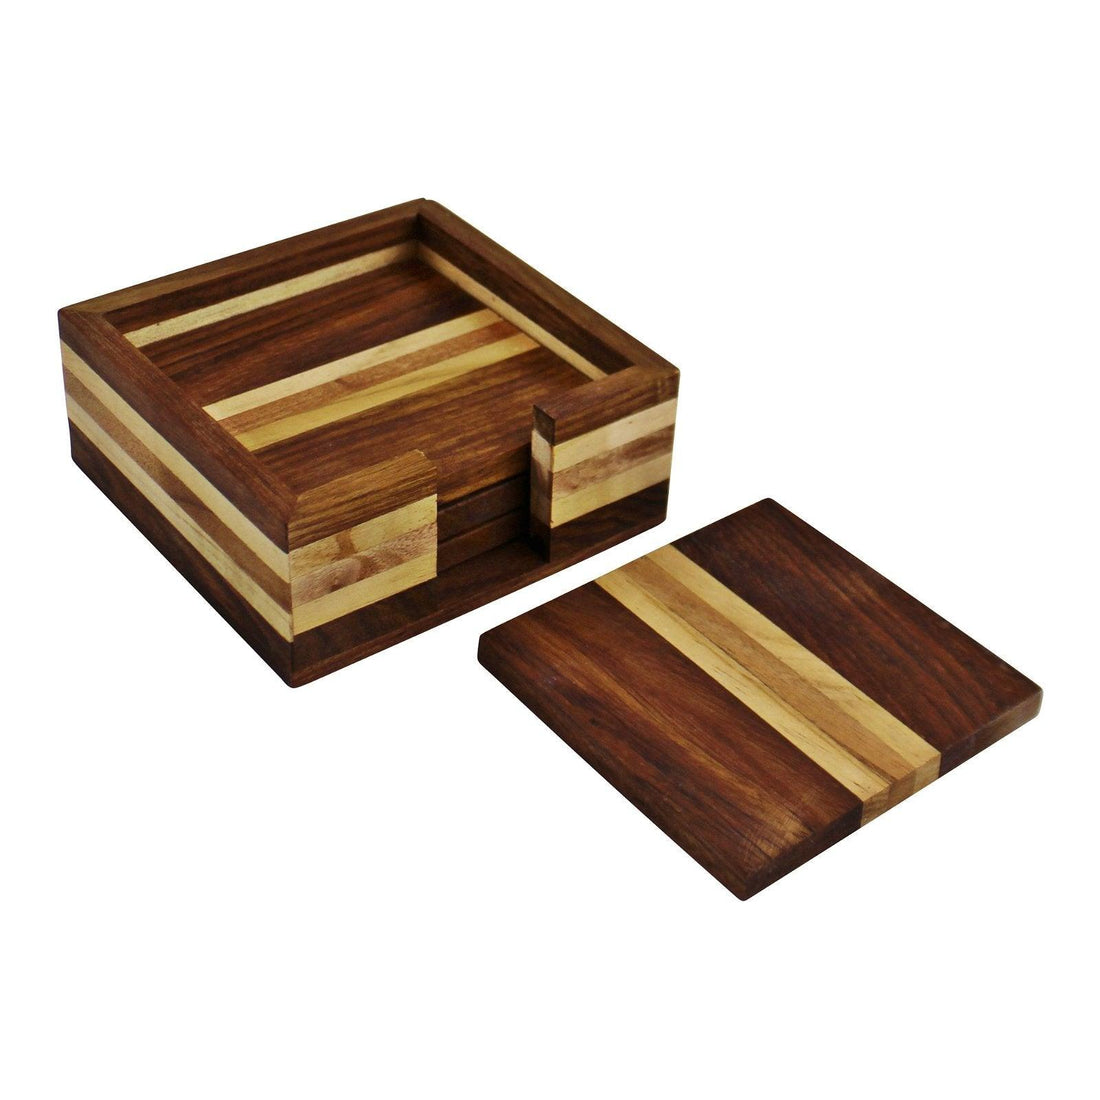 Set of 4 Wooden Coasters With Holder - £20.99 - Coasters & Placemats 